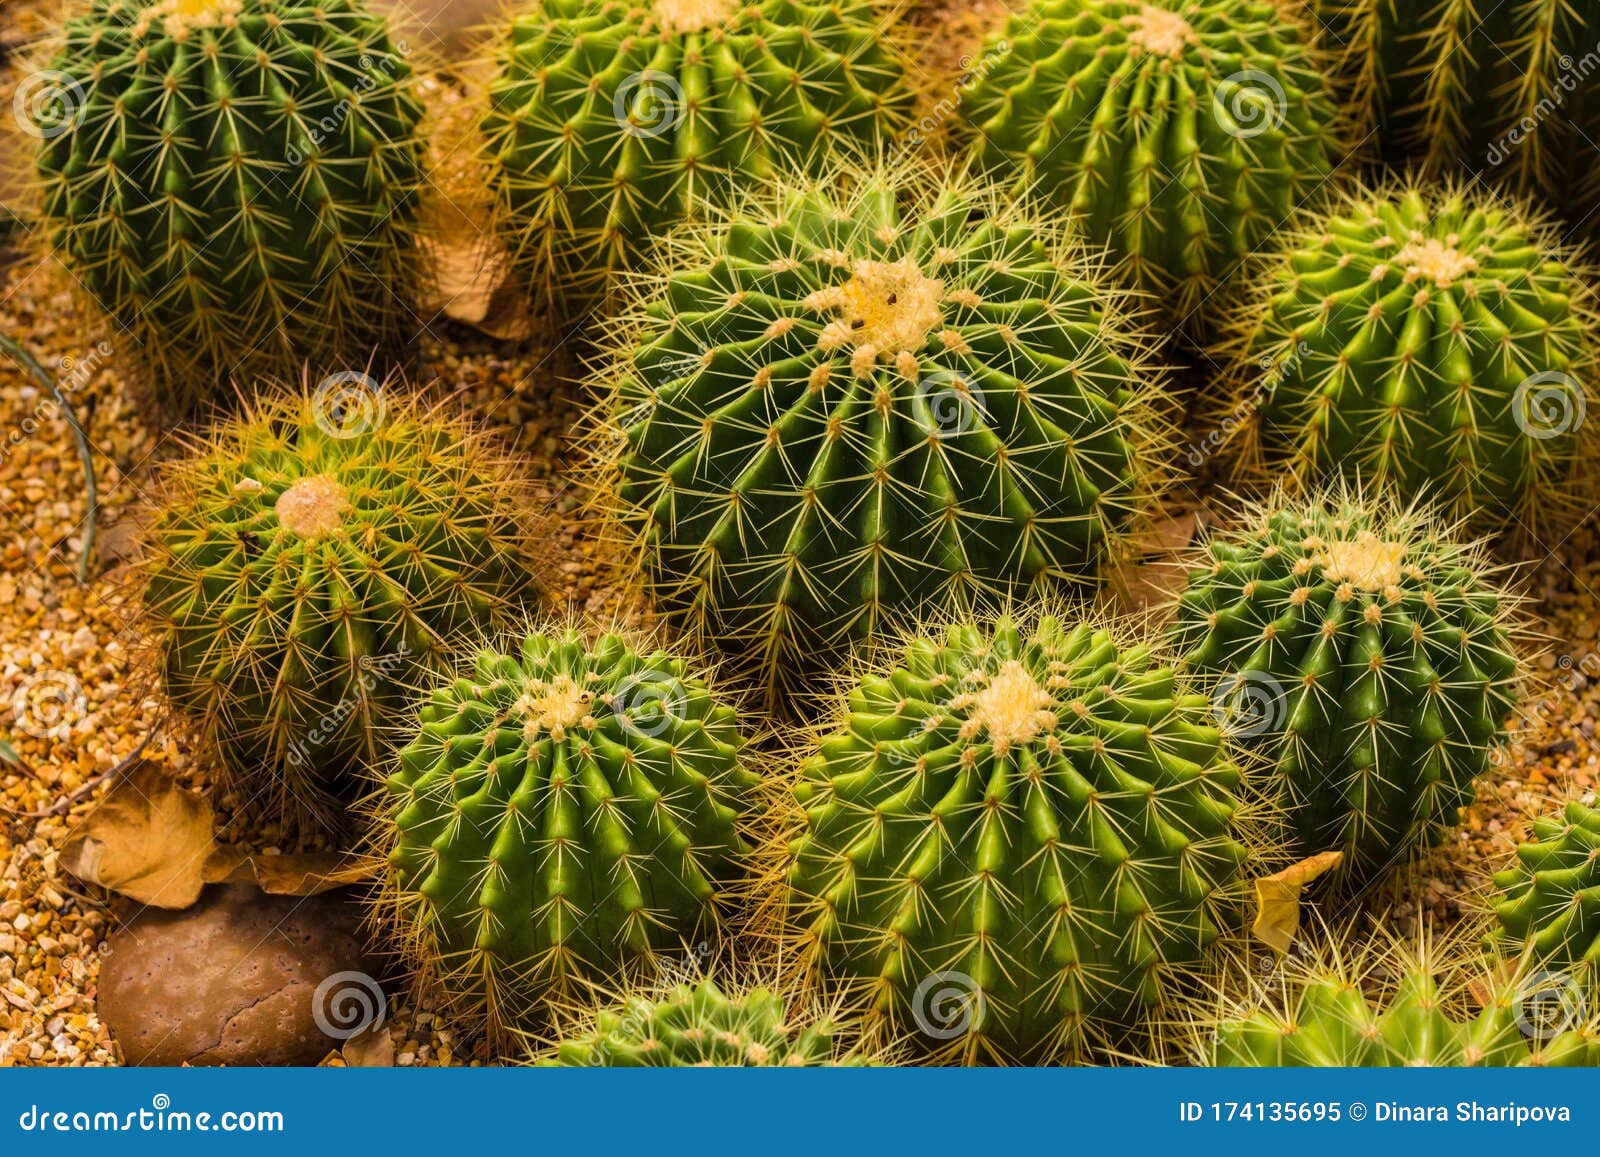 Prickly Plant that Grows in the Desert, Cacti of Different Sizes - Image of flower, round: 174135695